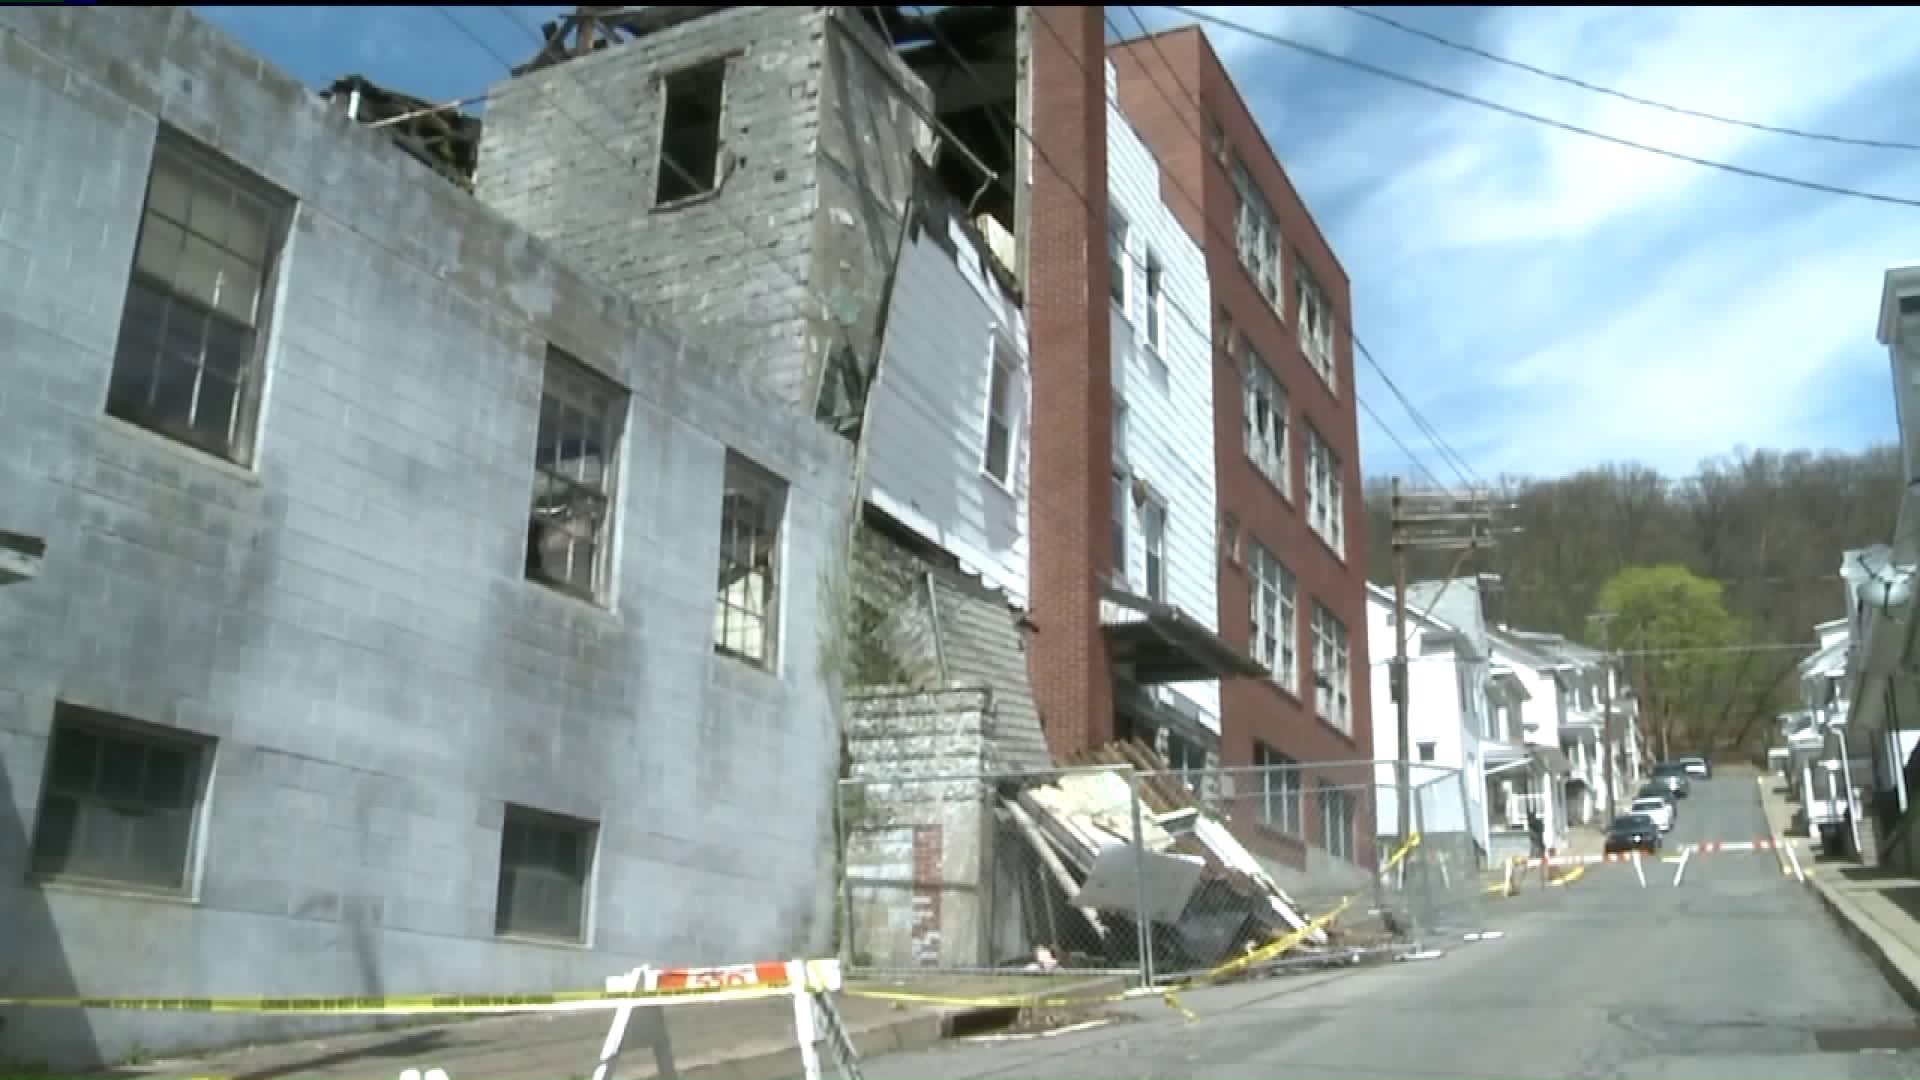 Blight Money to Stabilize Collapsing Building